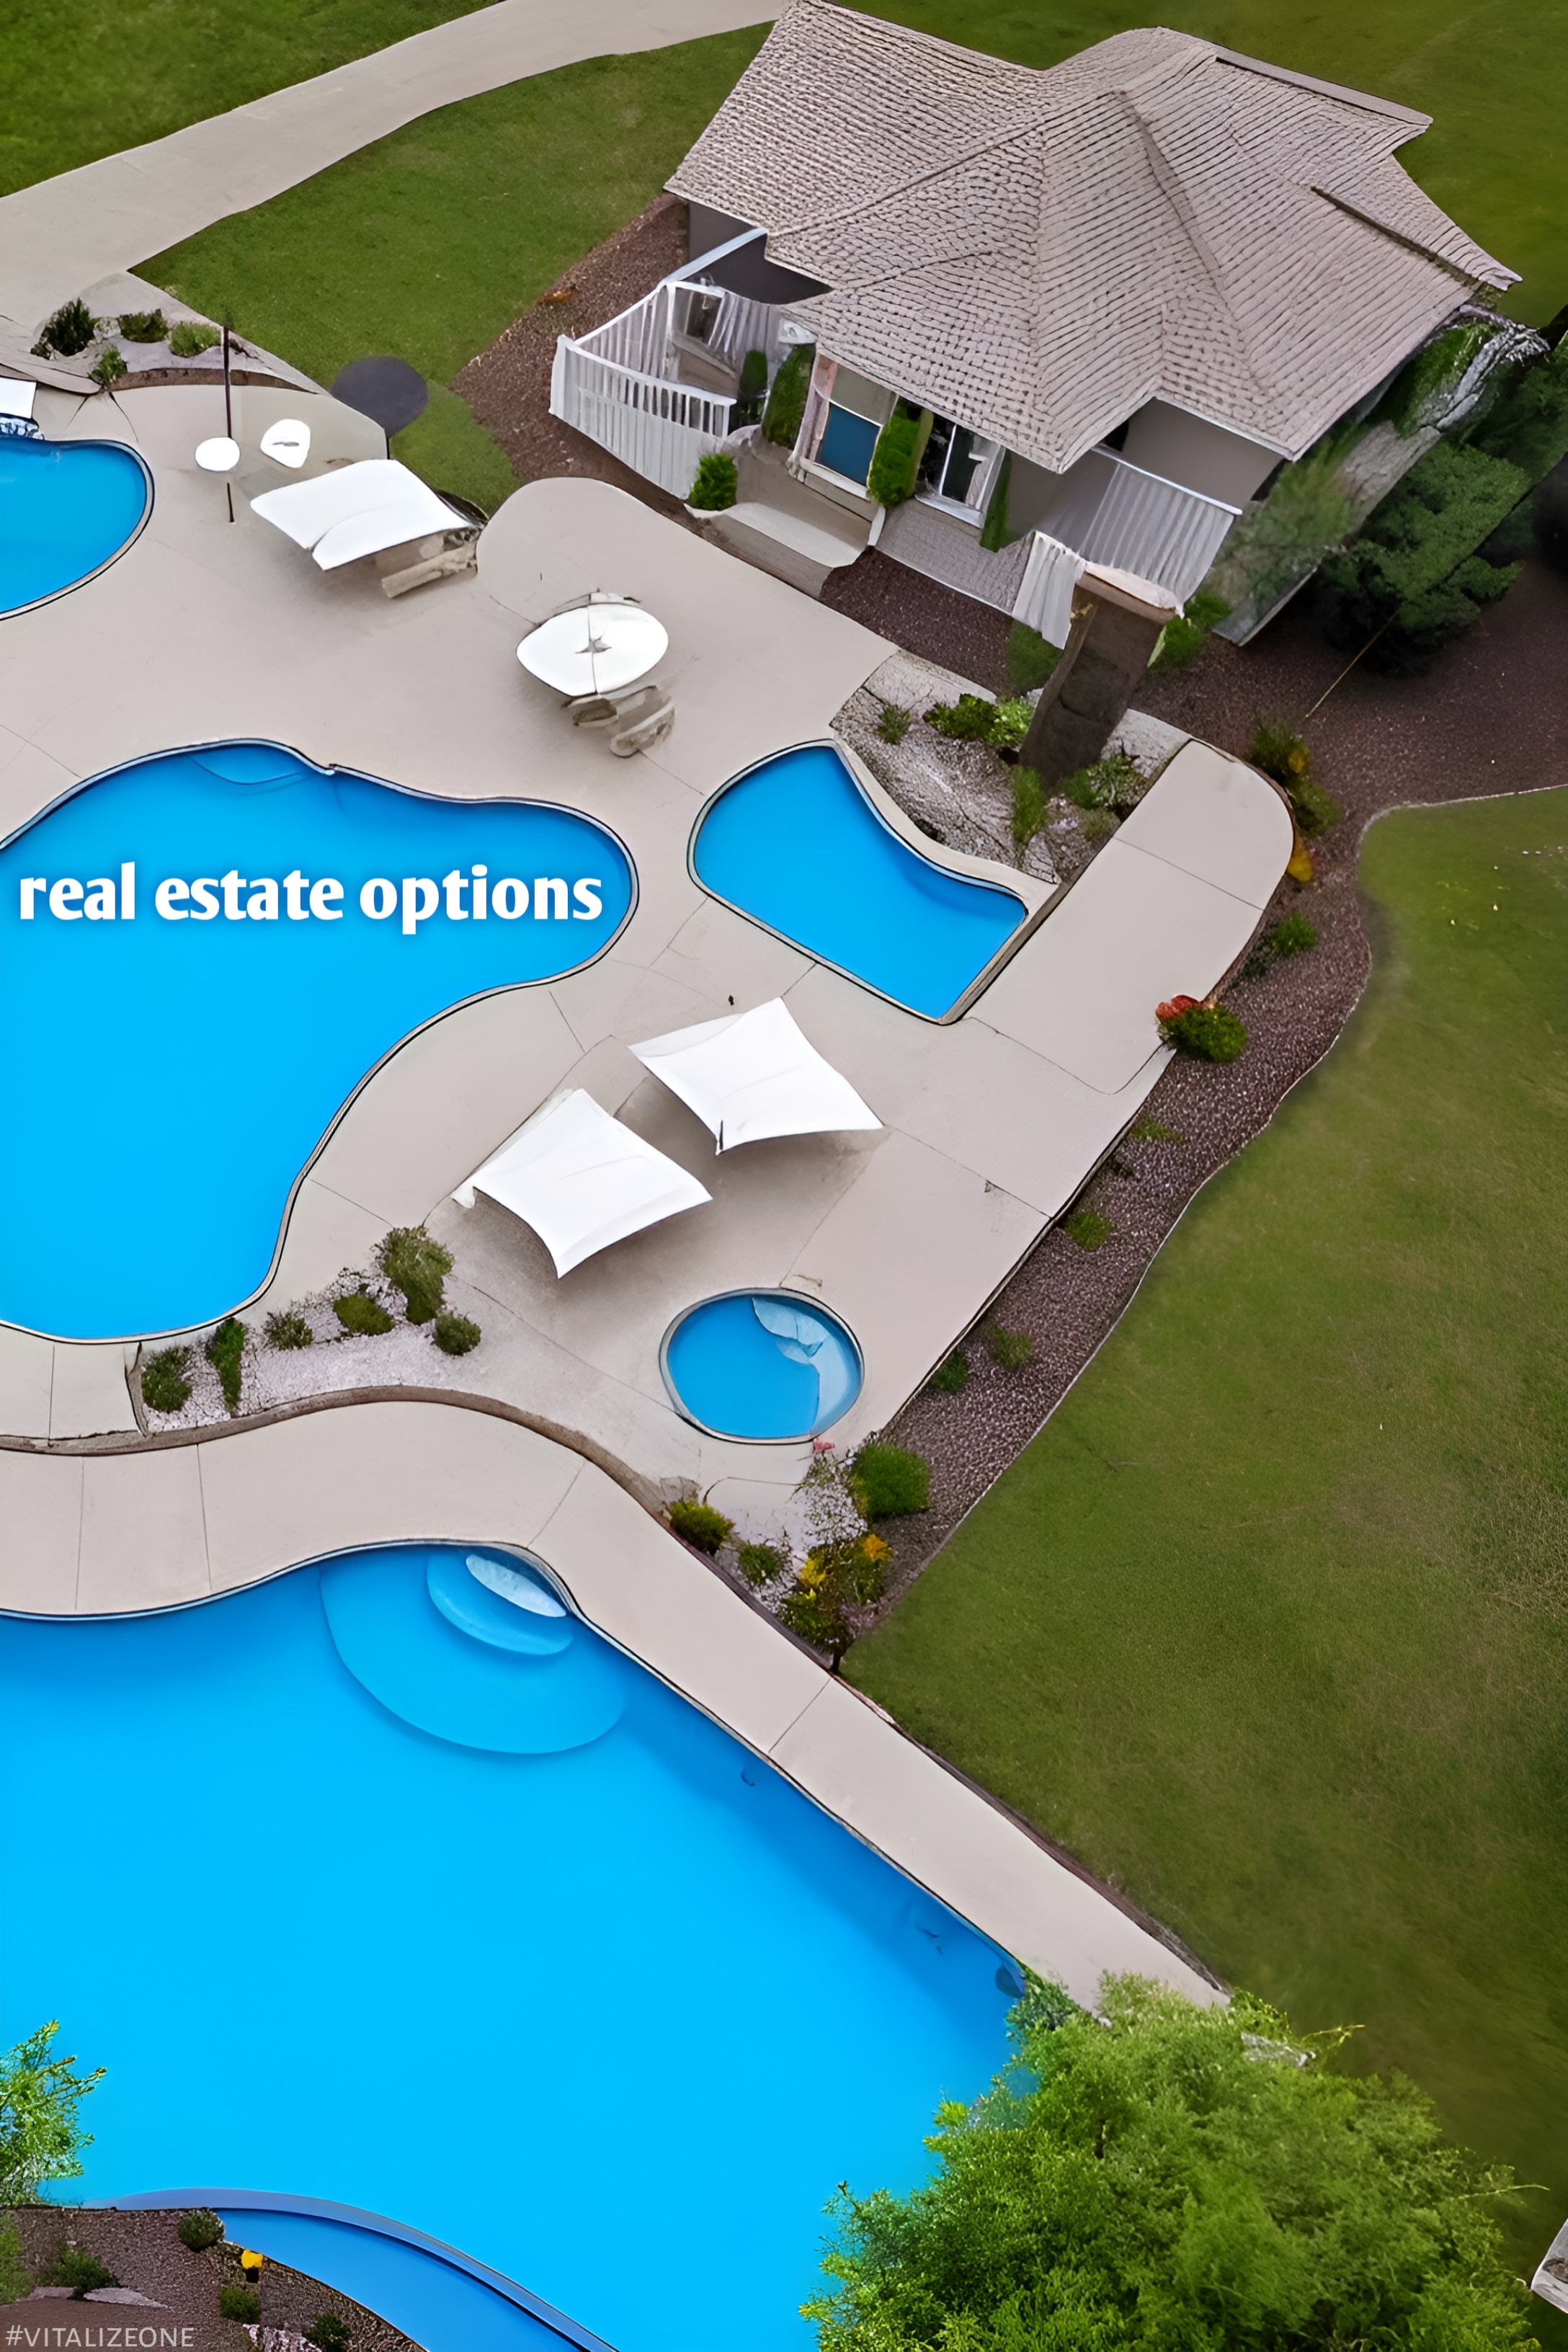 Three Options For Your Next Real Estate Investment, VitalyTennant.com, #vitalizeone